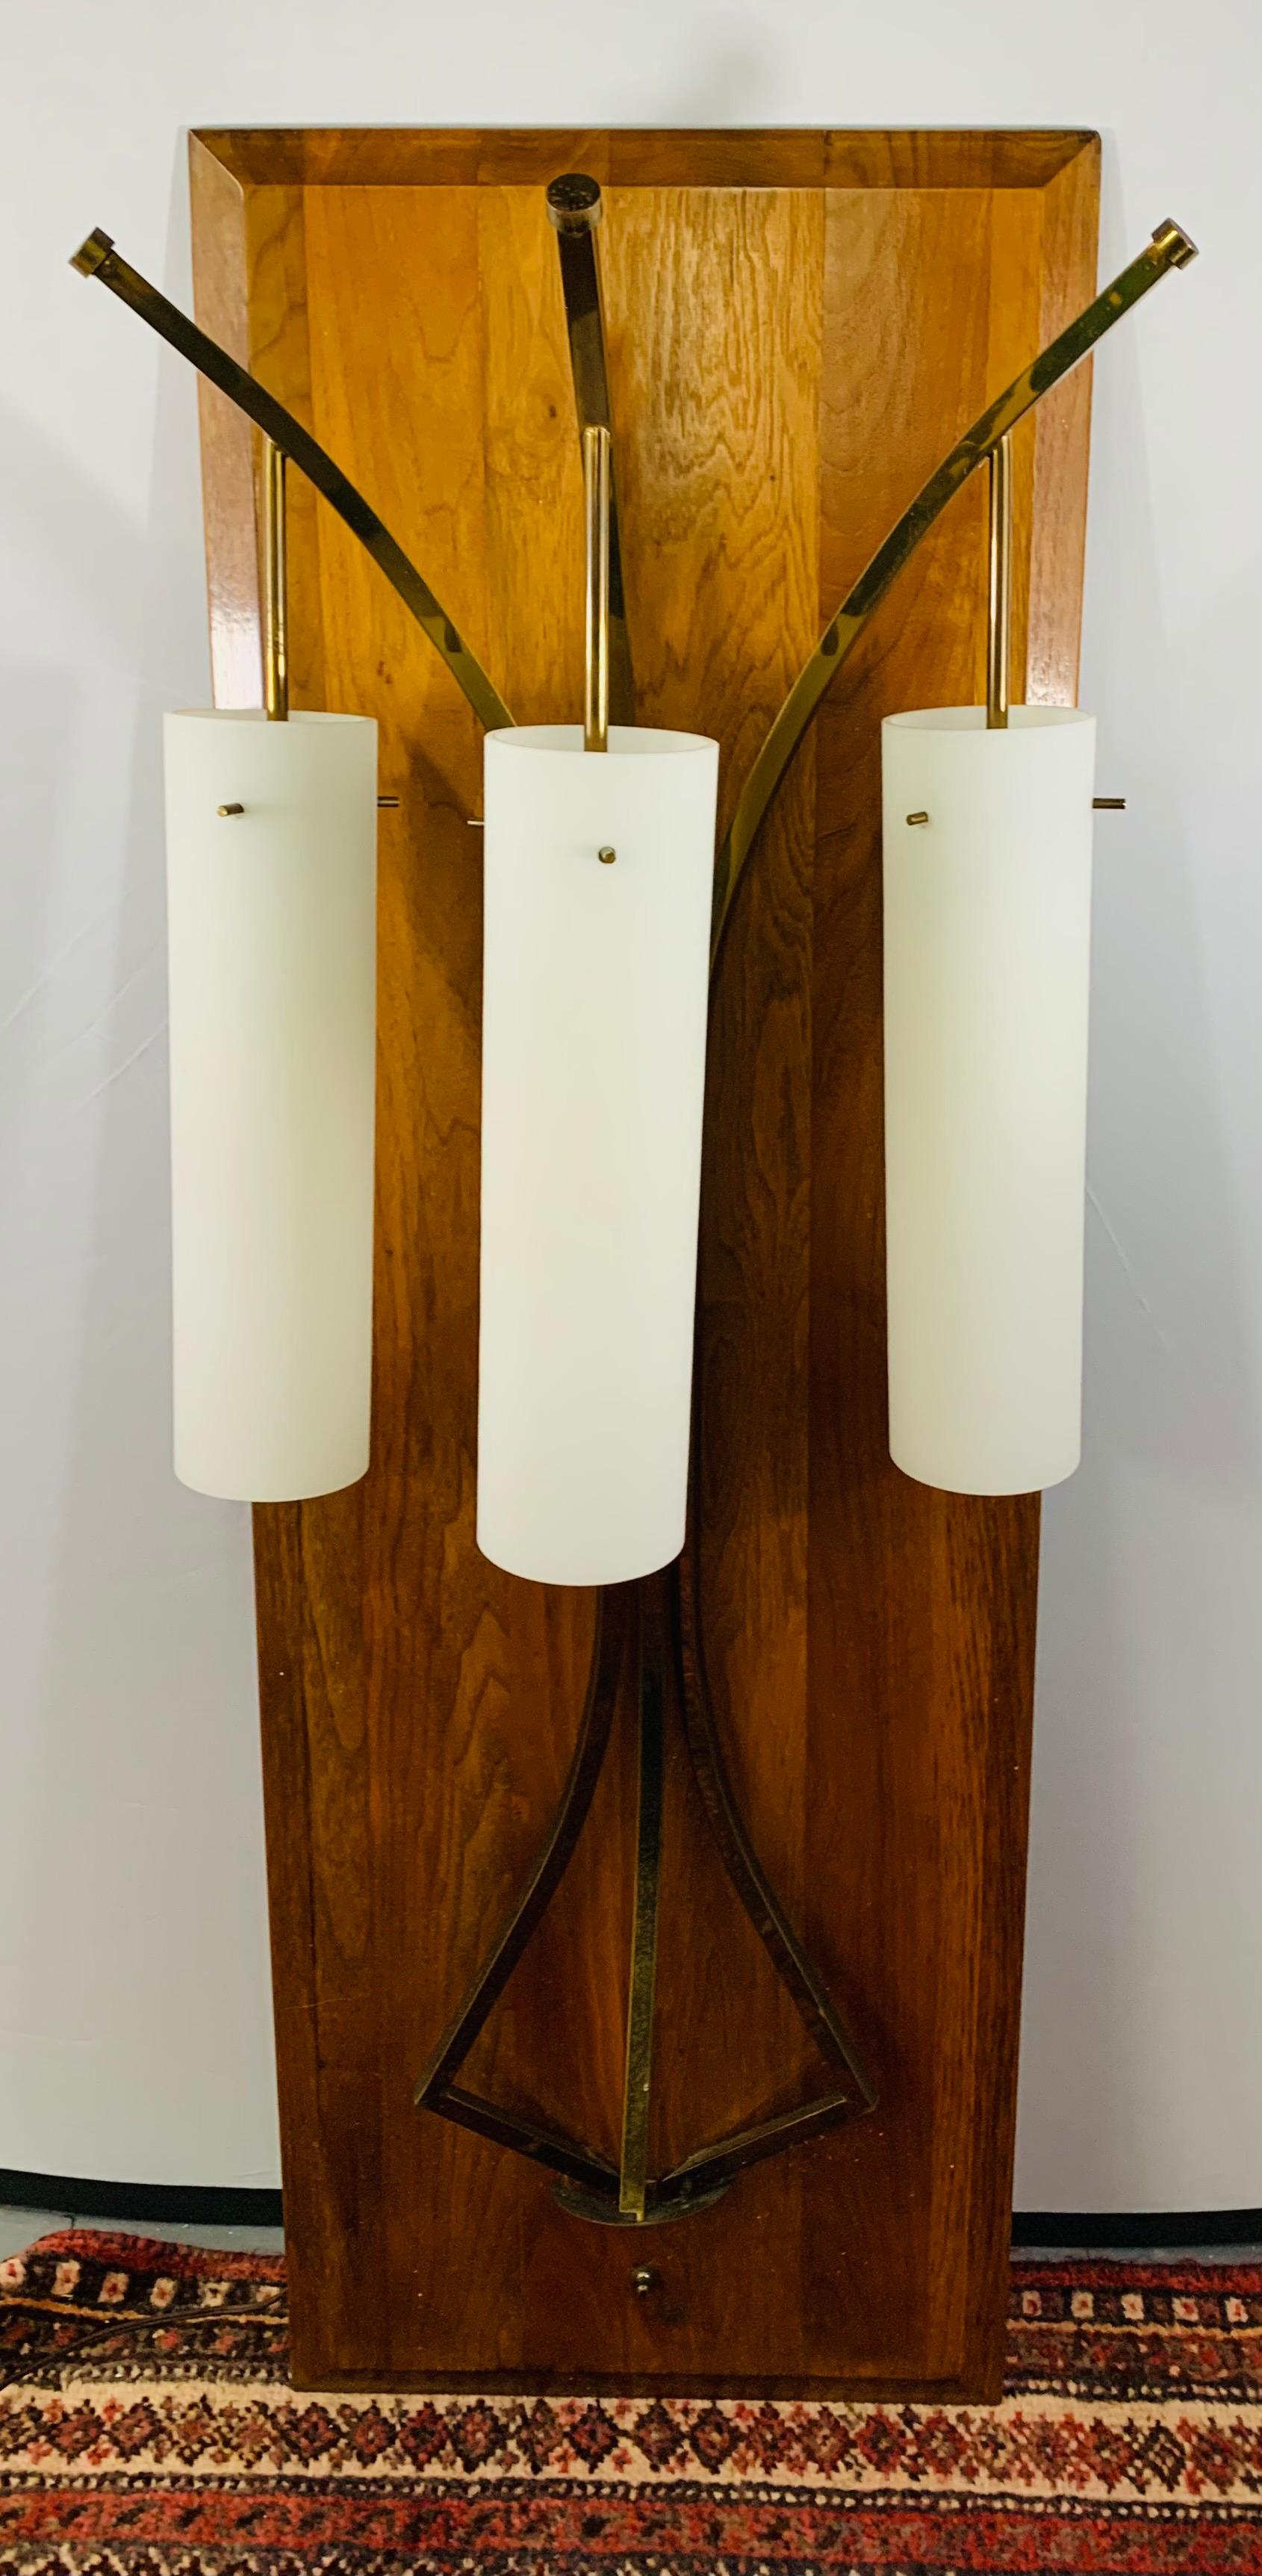 A large Mid-Century Modern wall fixture with brass frame. The fixture has three lights, each in a cylindric shape and made of milk glass. The lights are attached to a rectangular wooden panel. There is one switch that controls the three light and